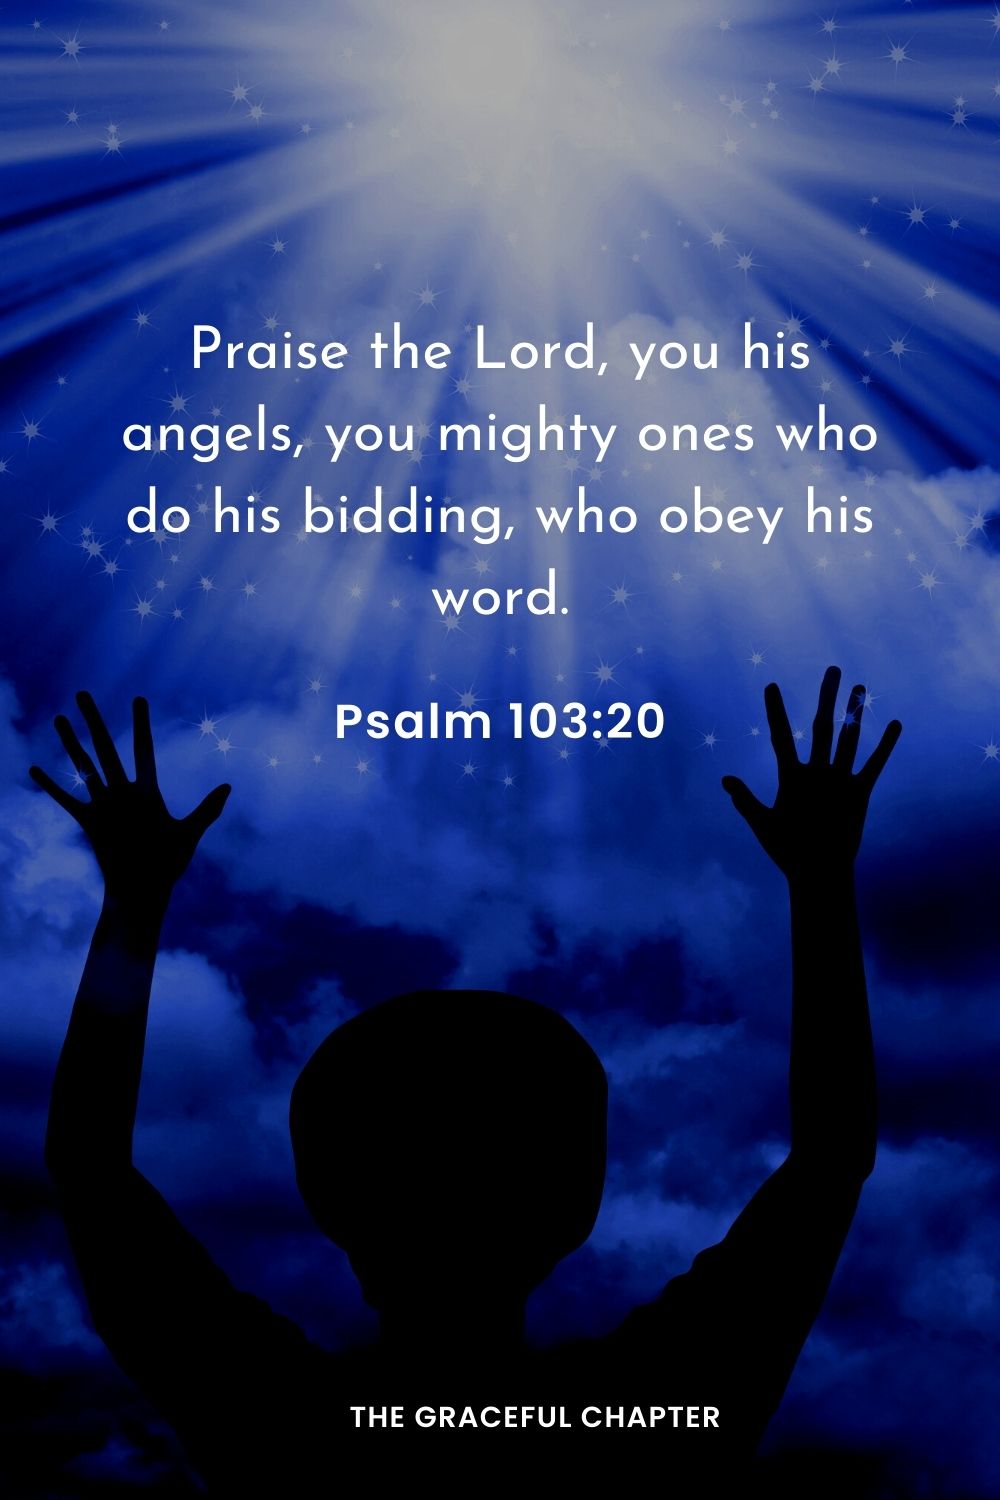 Praise the Lord, you his angels, you mighty ones who do his bidding, who obey his word.